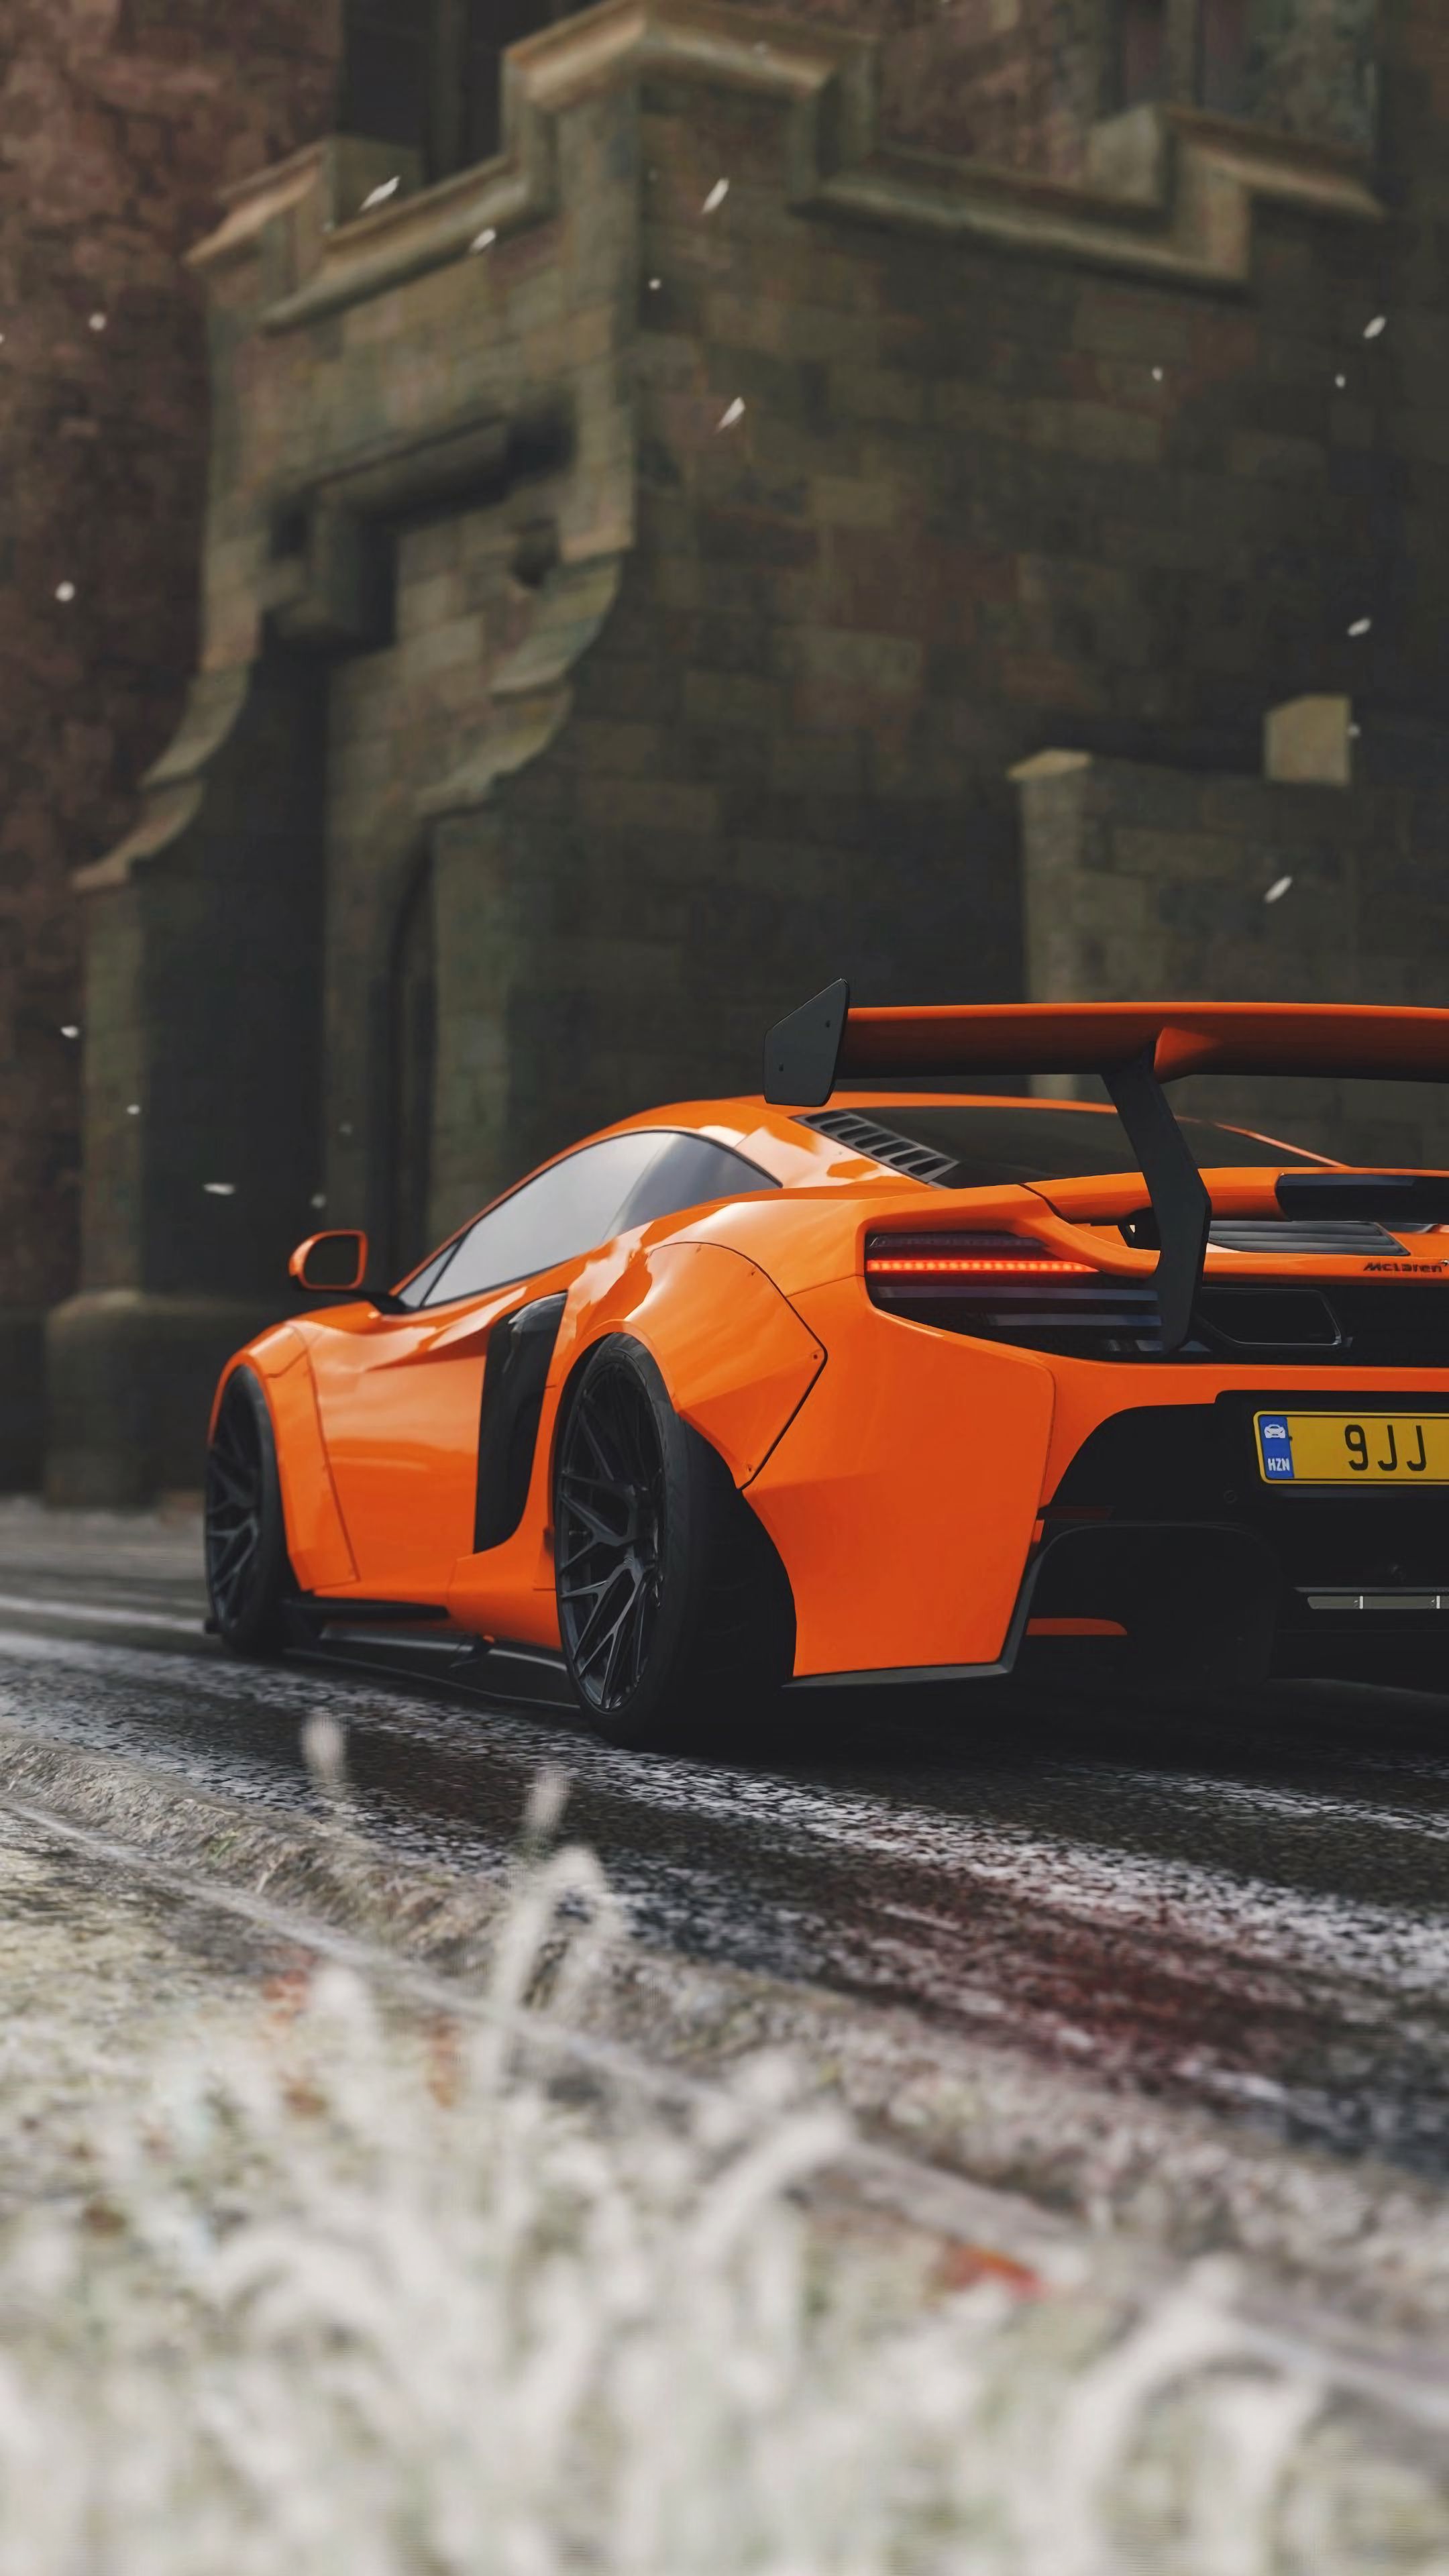 153268 download wallpaper races, sports, mclaren, cars, orange, sports car, mclaren 650s screensavers and pictures for free